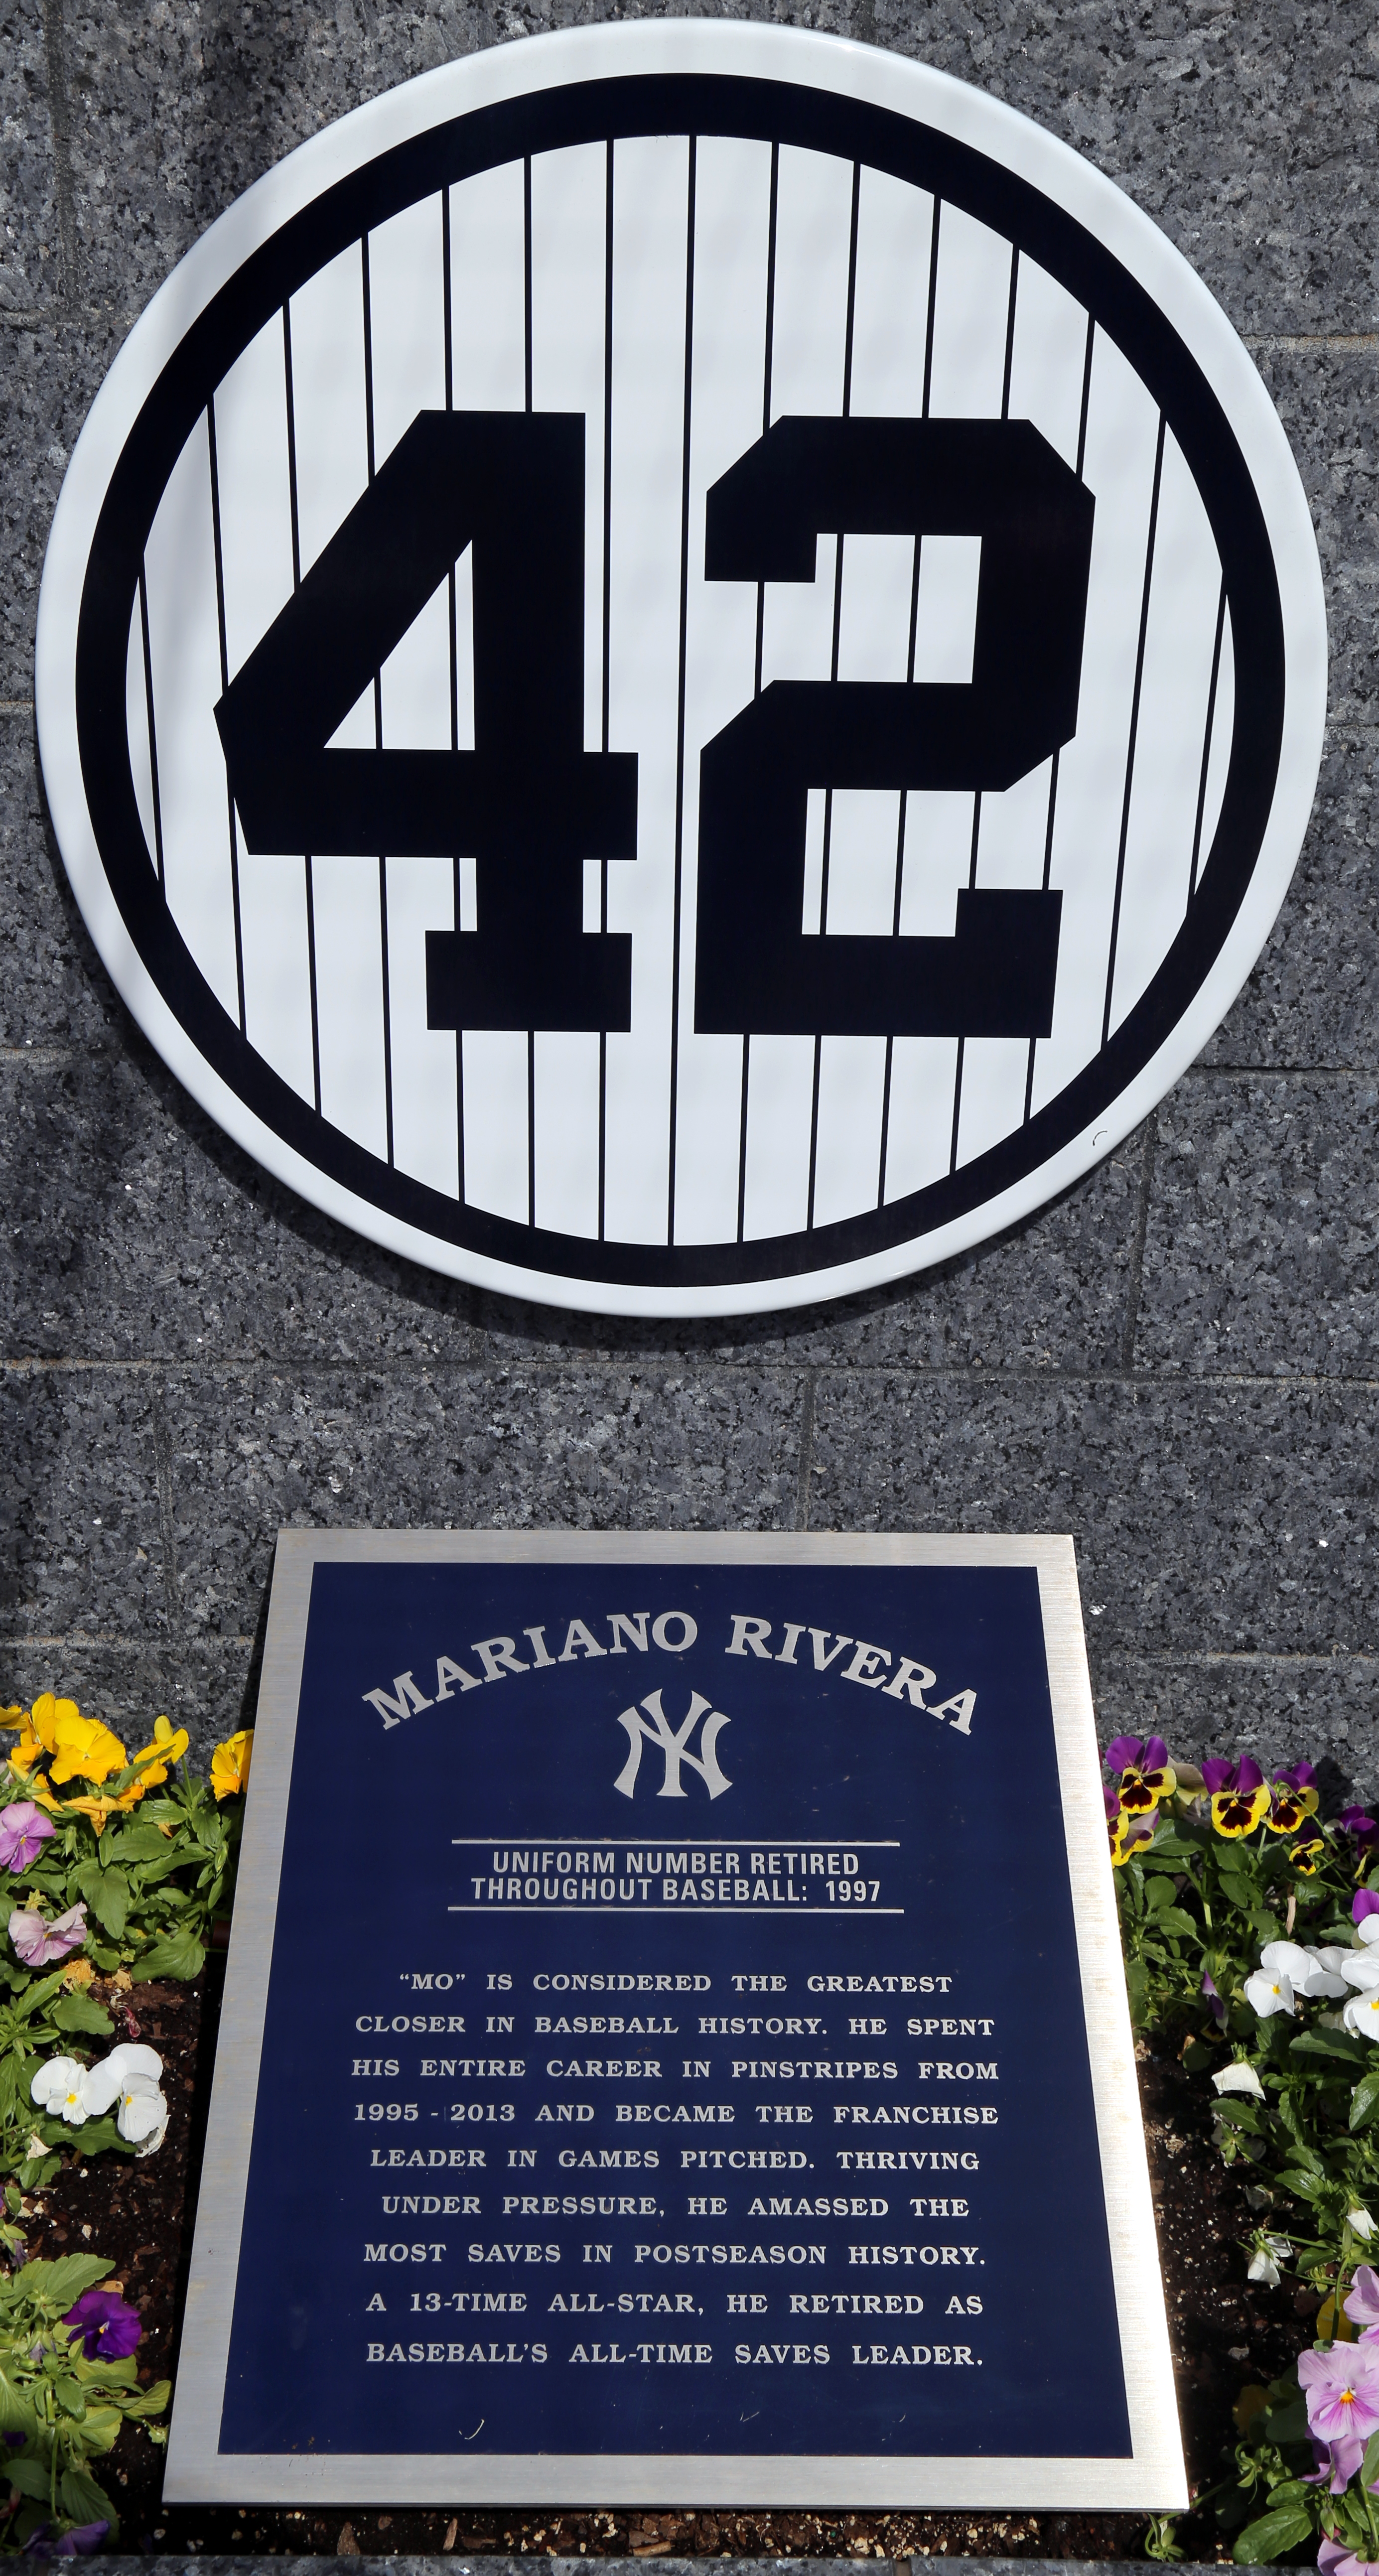 Yankees to dedicate plaque to Mariano Rivera this summer – The